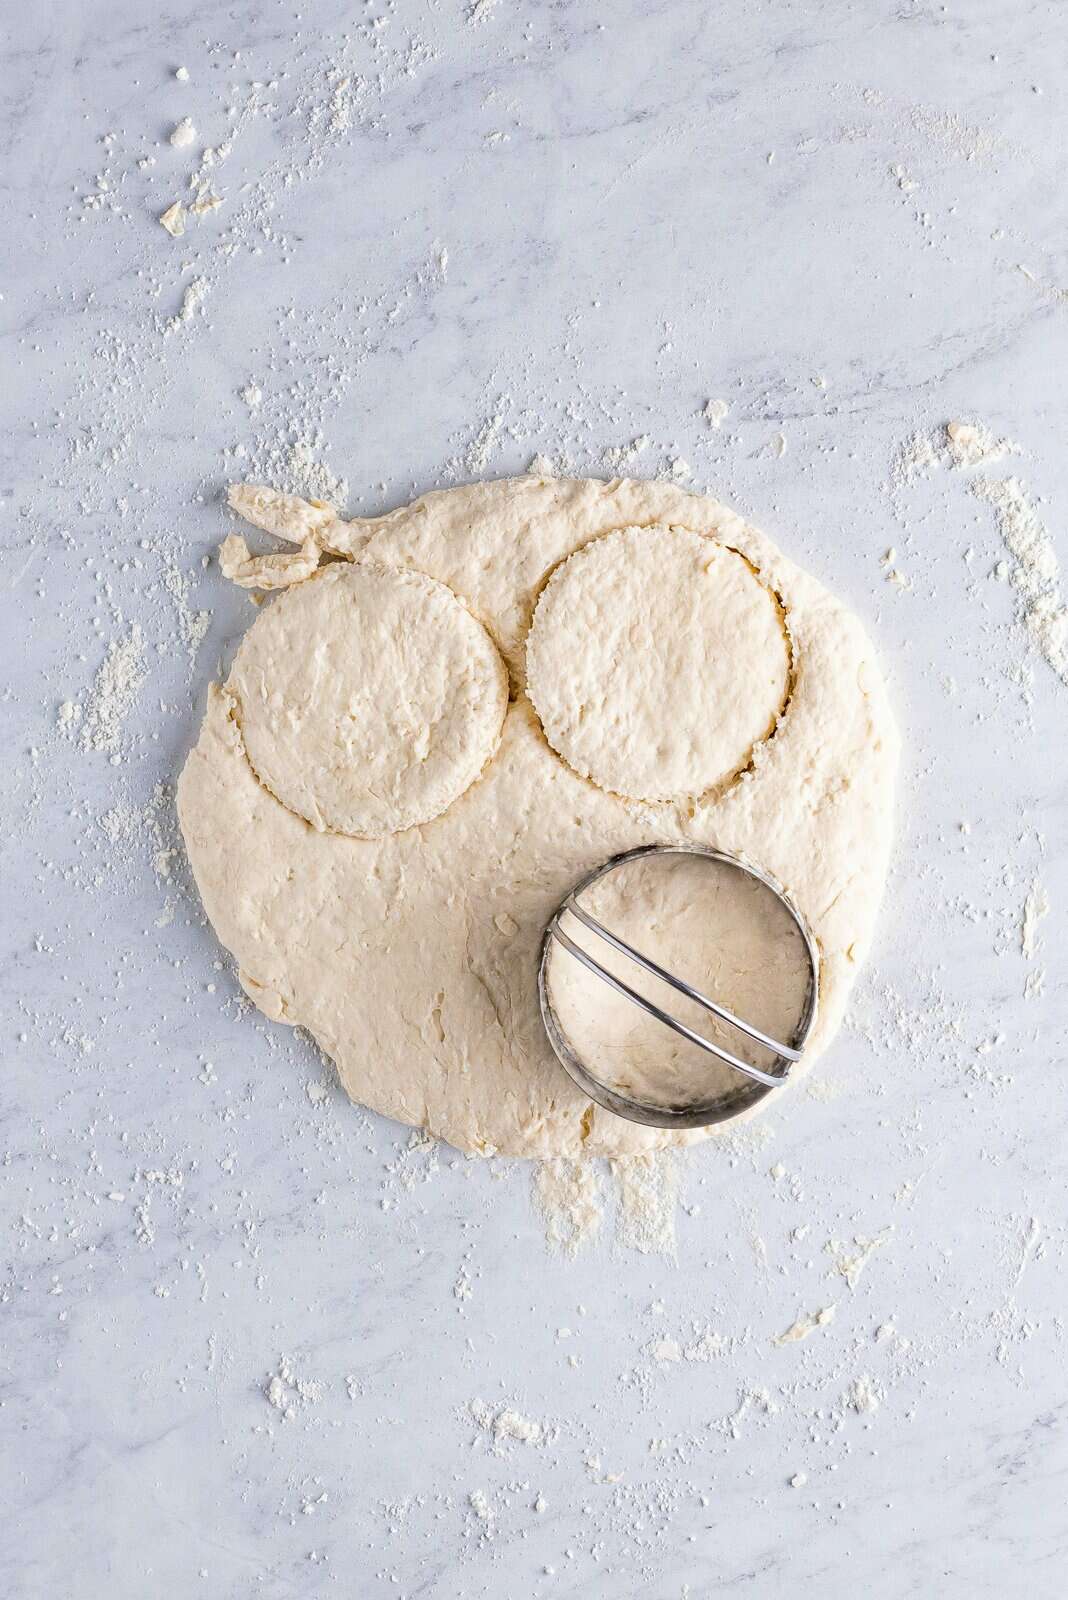 Biscuit dough with cutter cutting out dough. 